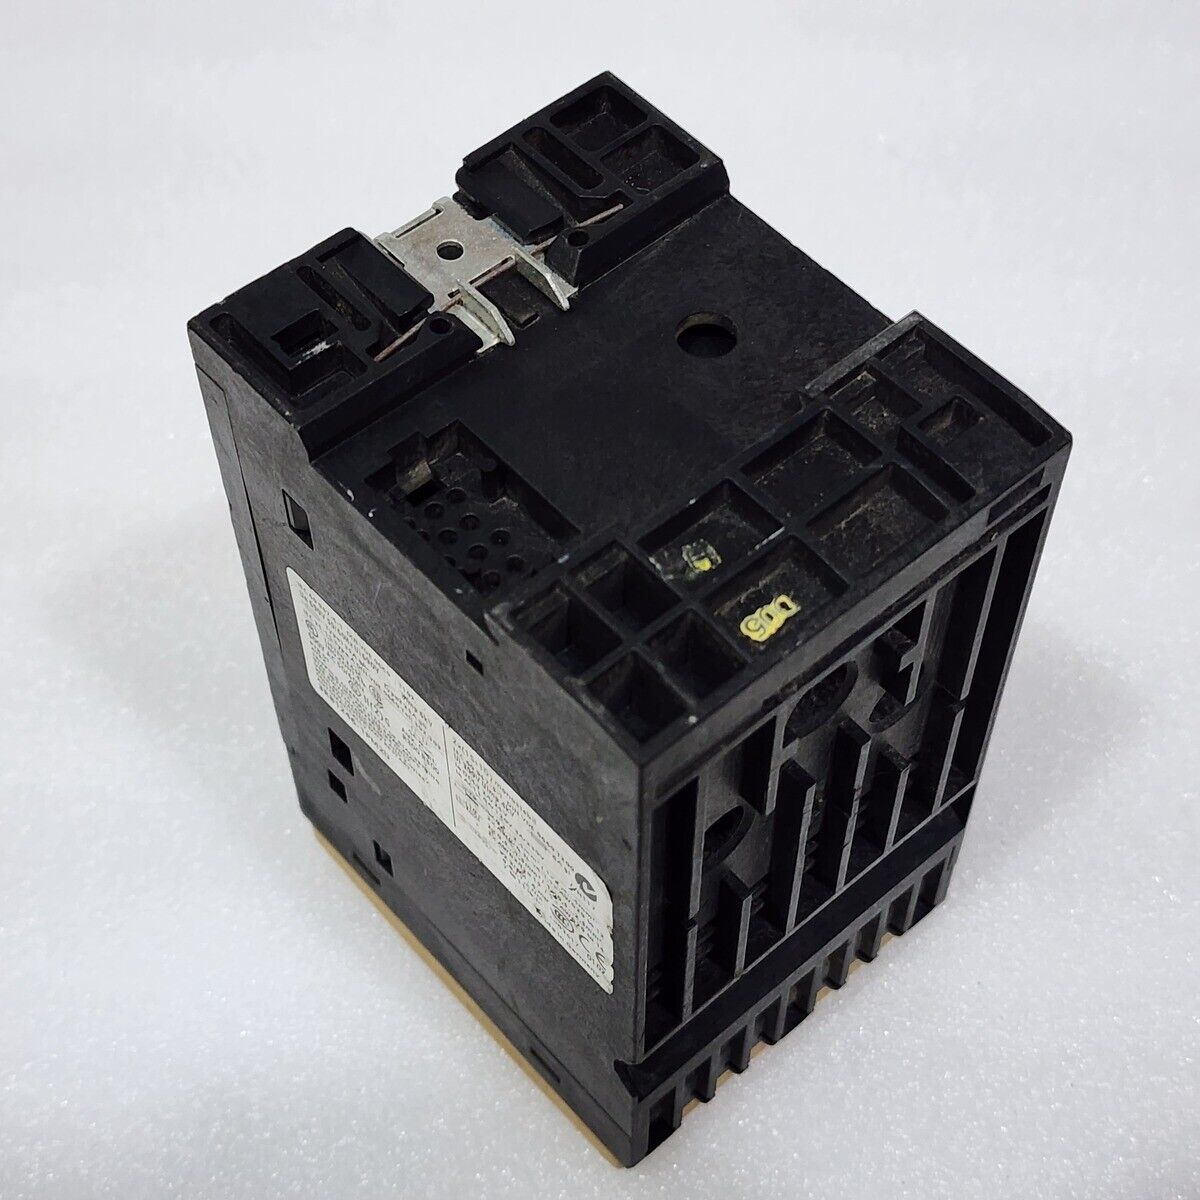 SIEMENS 3RB12 ELECTRONIC OVERLOAD RELAY 3RB1246-1PM20